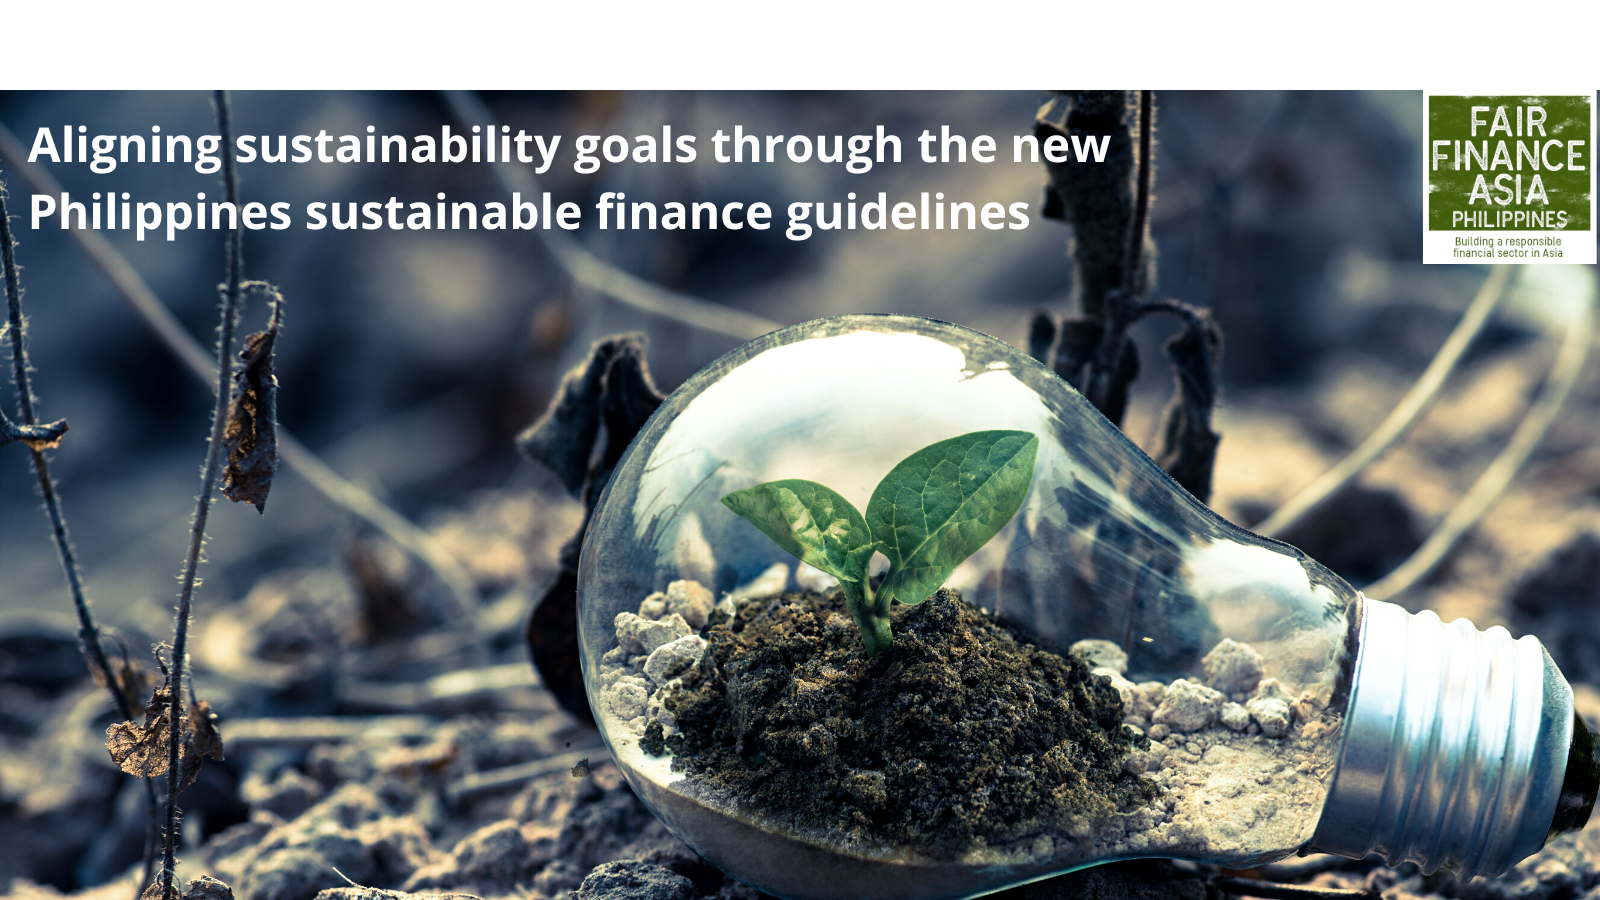 Aligning sustainability goals through the new Philippines sustainable finance guiding principles